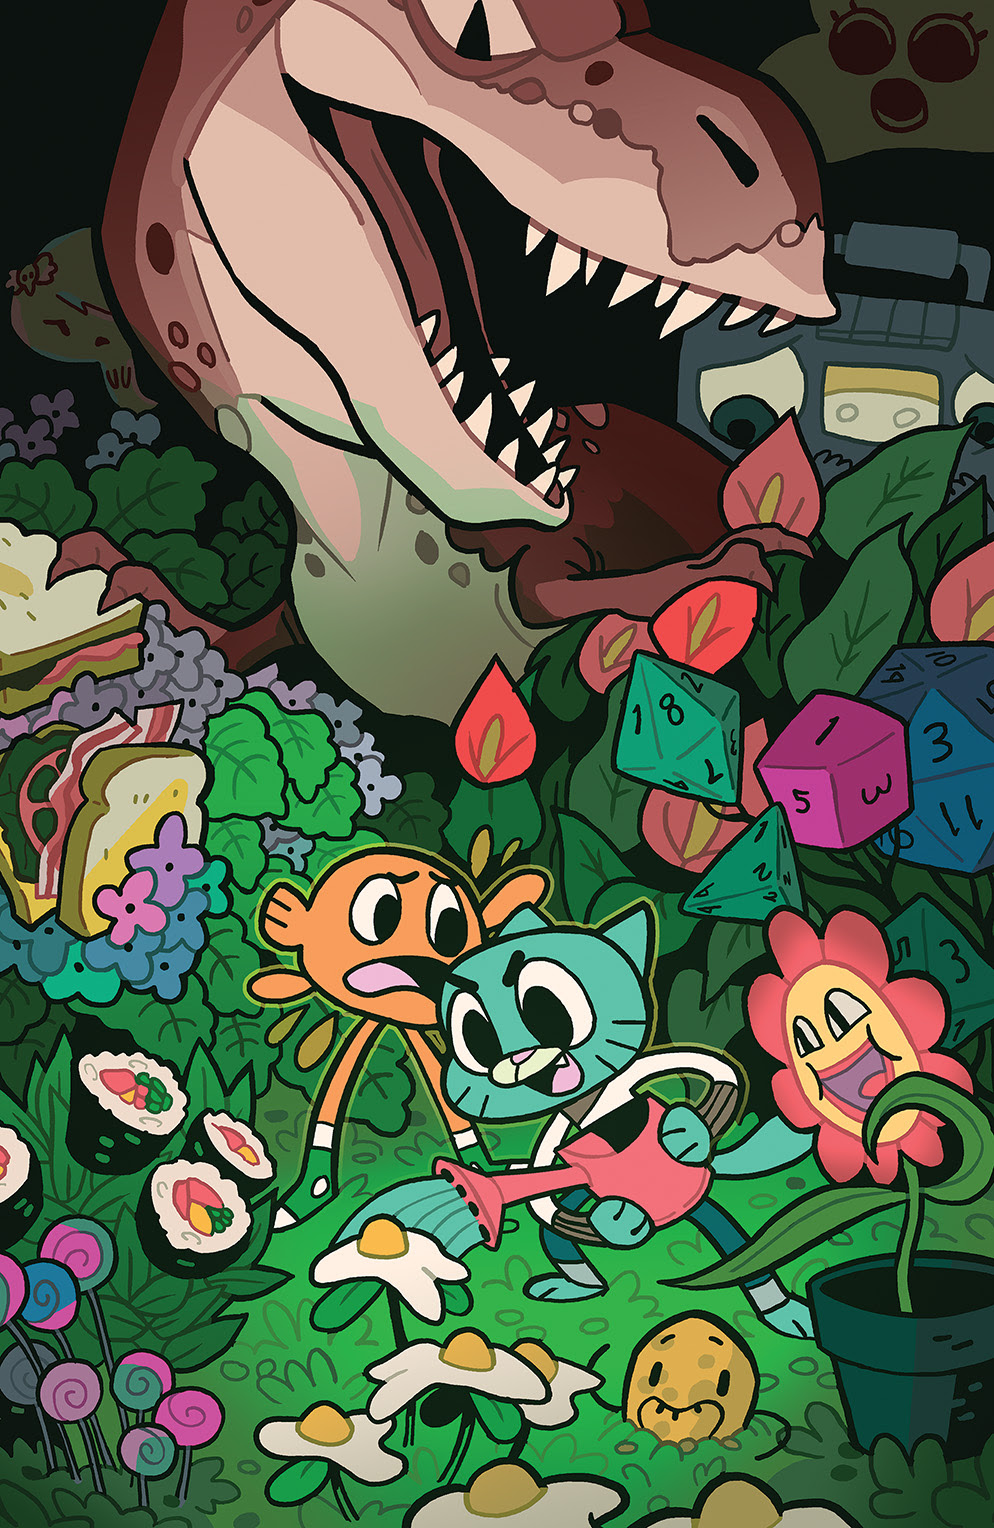 THE AMAZING WORLD OF GUMBALL #7 Cover C by Marc Ellerby